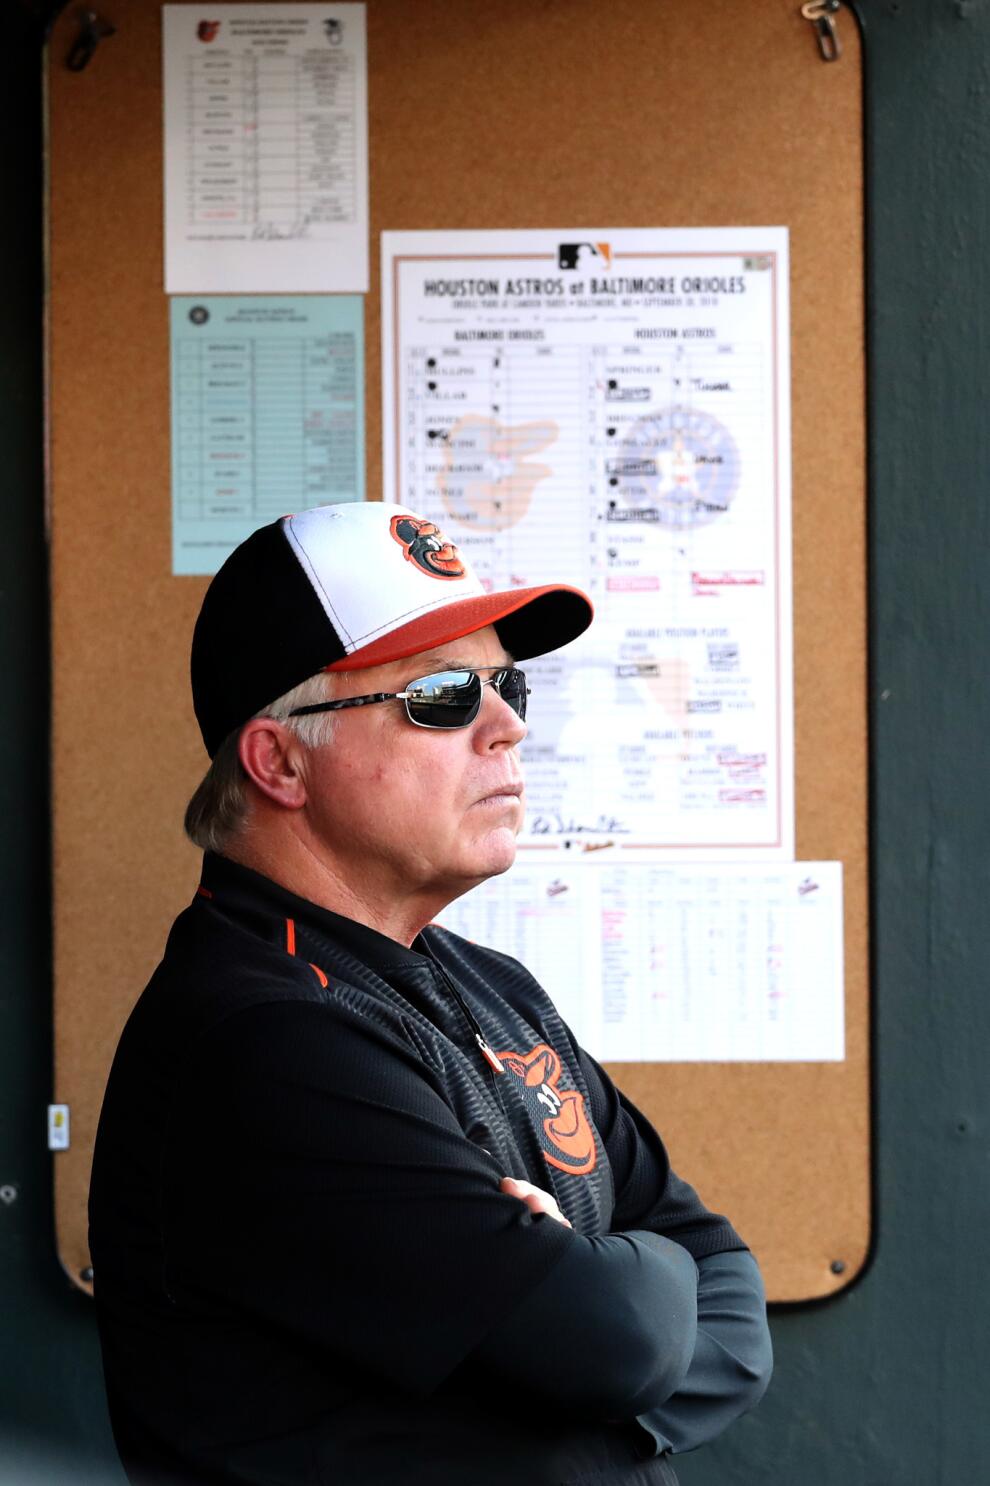 Former Orioles Manager Buck Showalter On Second Spring Training